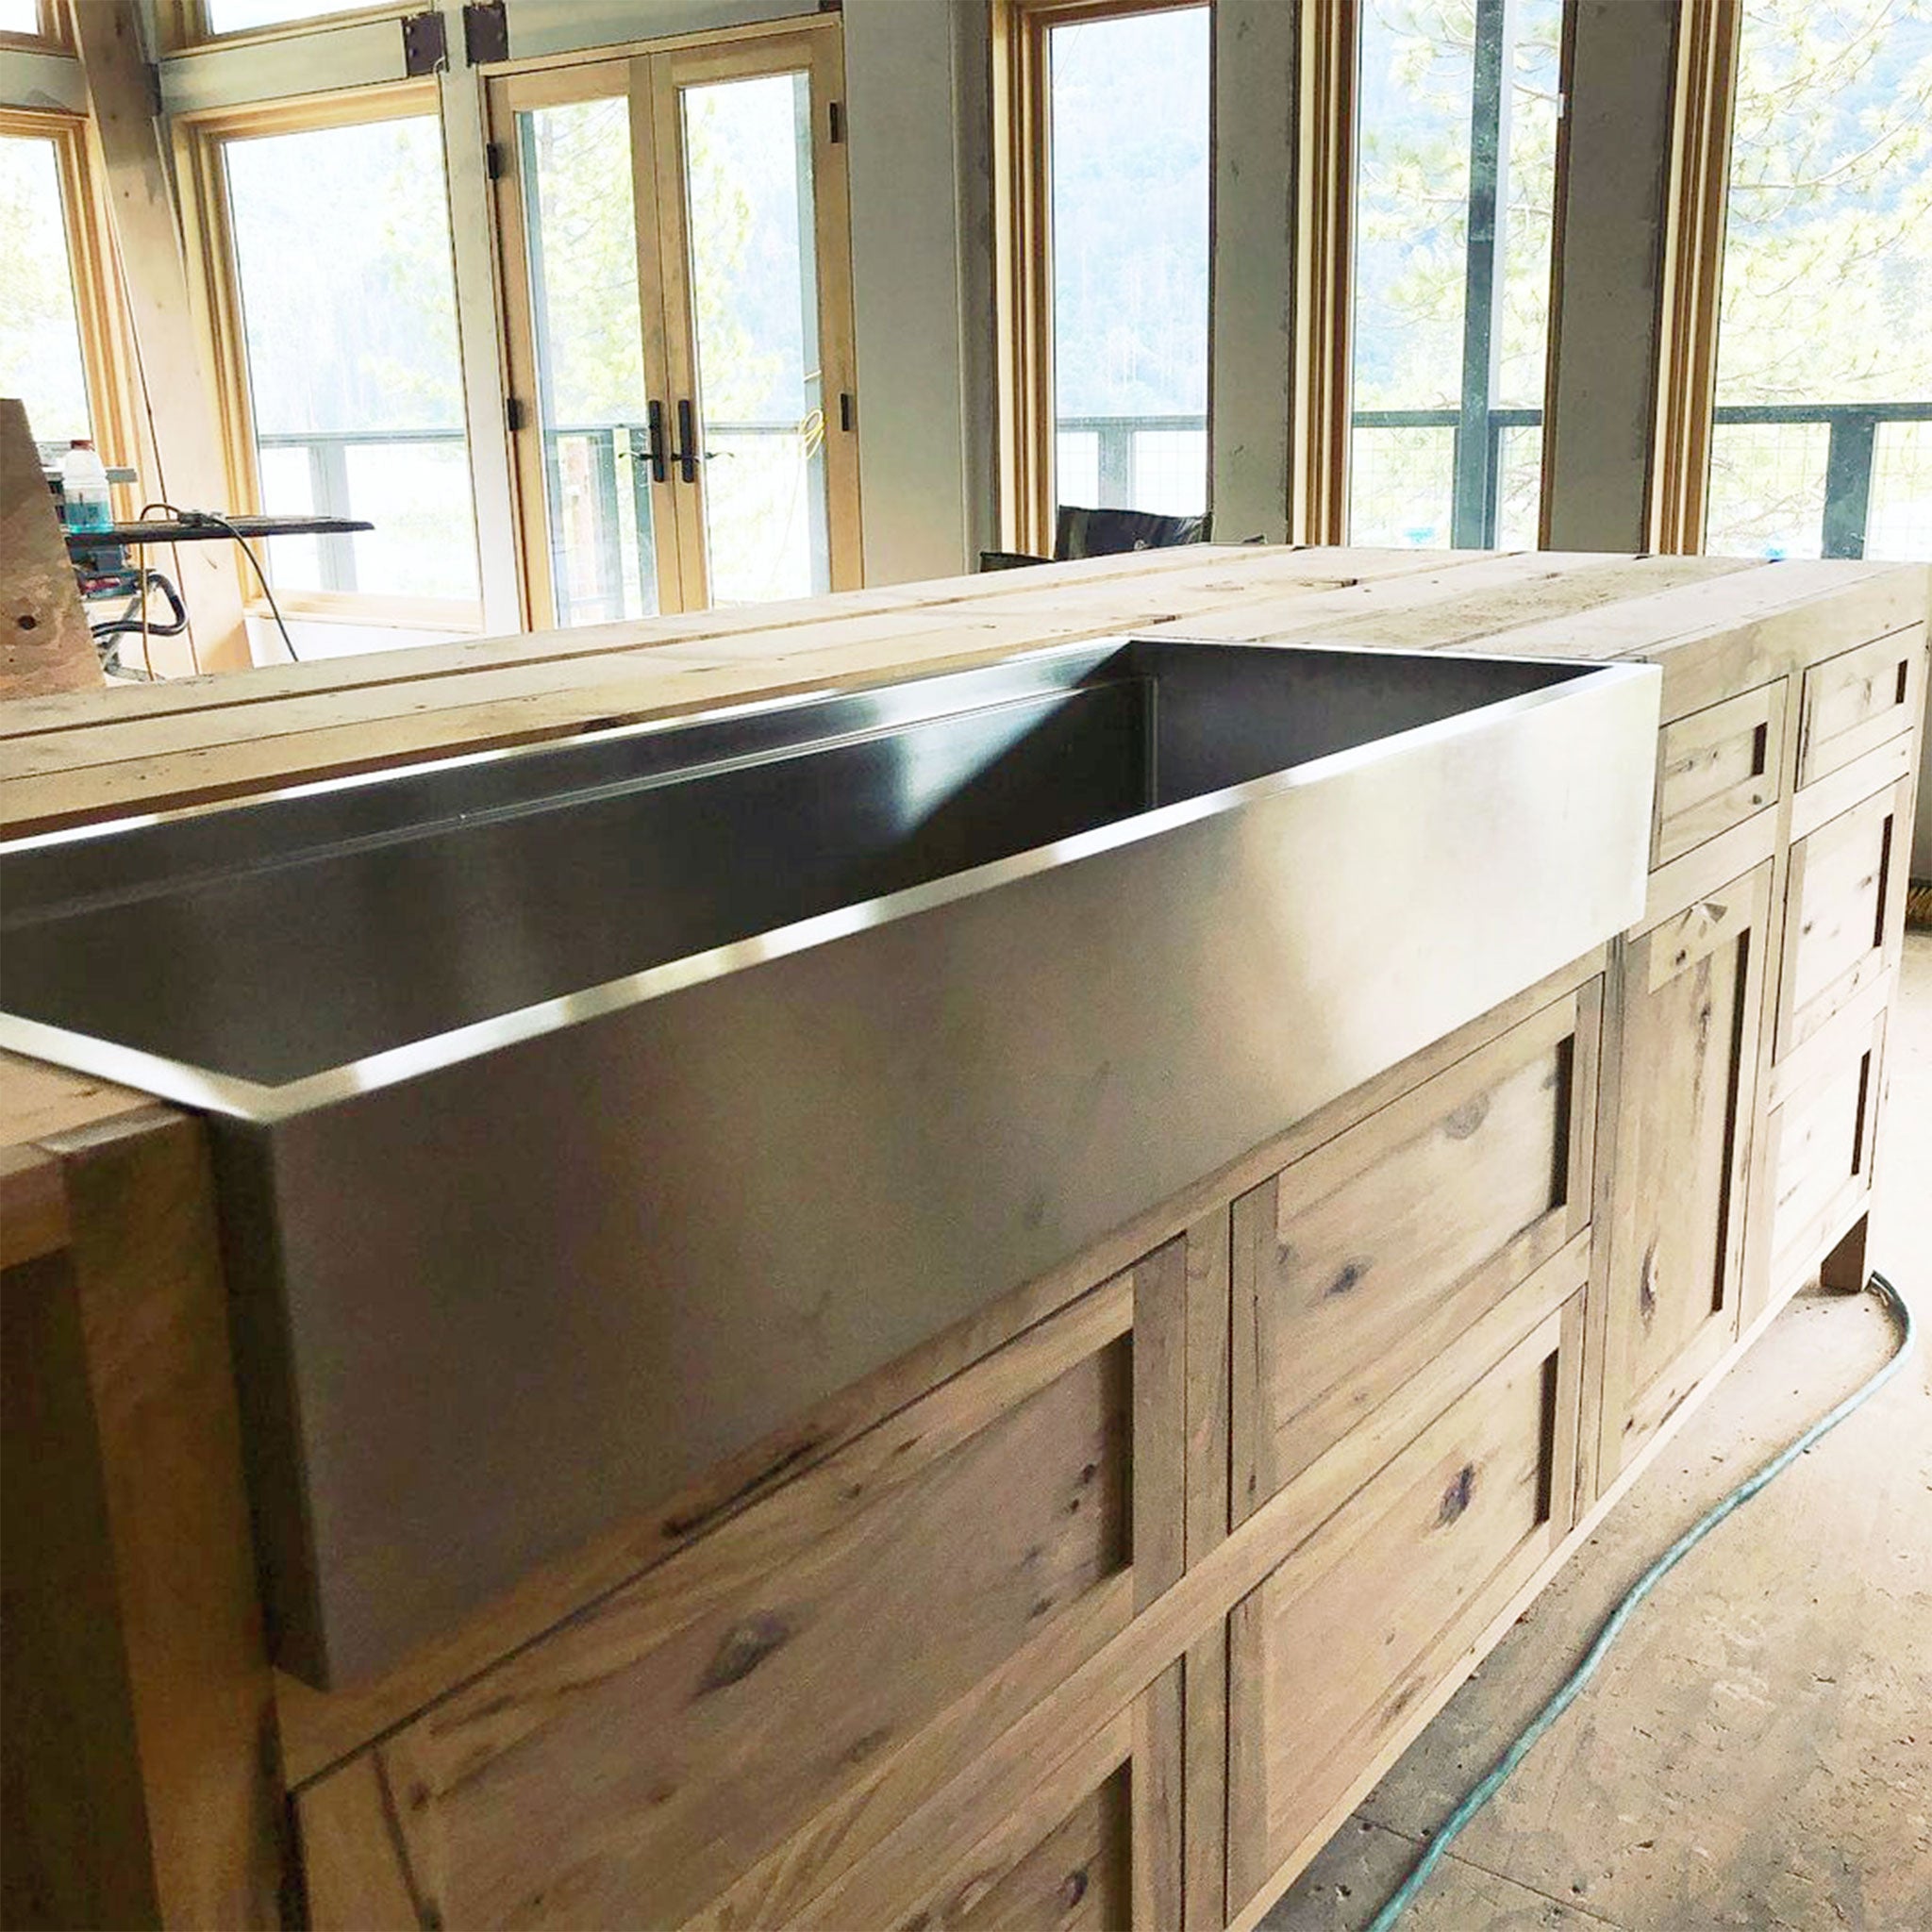 Front view of Create Good Sinks' 50" Workstation Farmhouse Sink